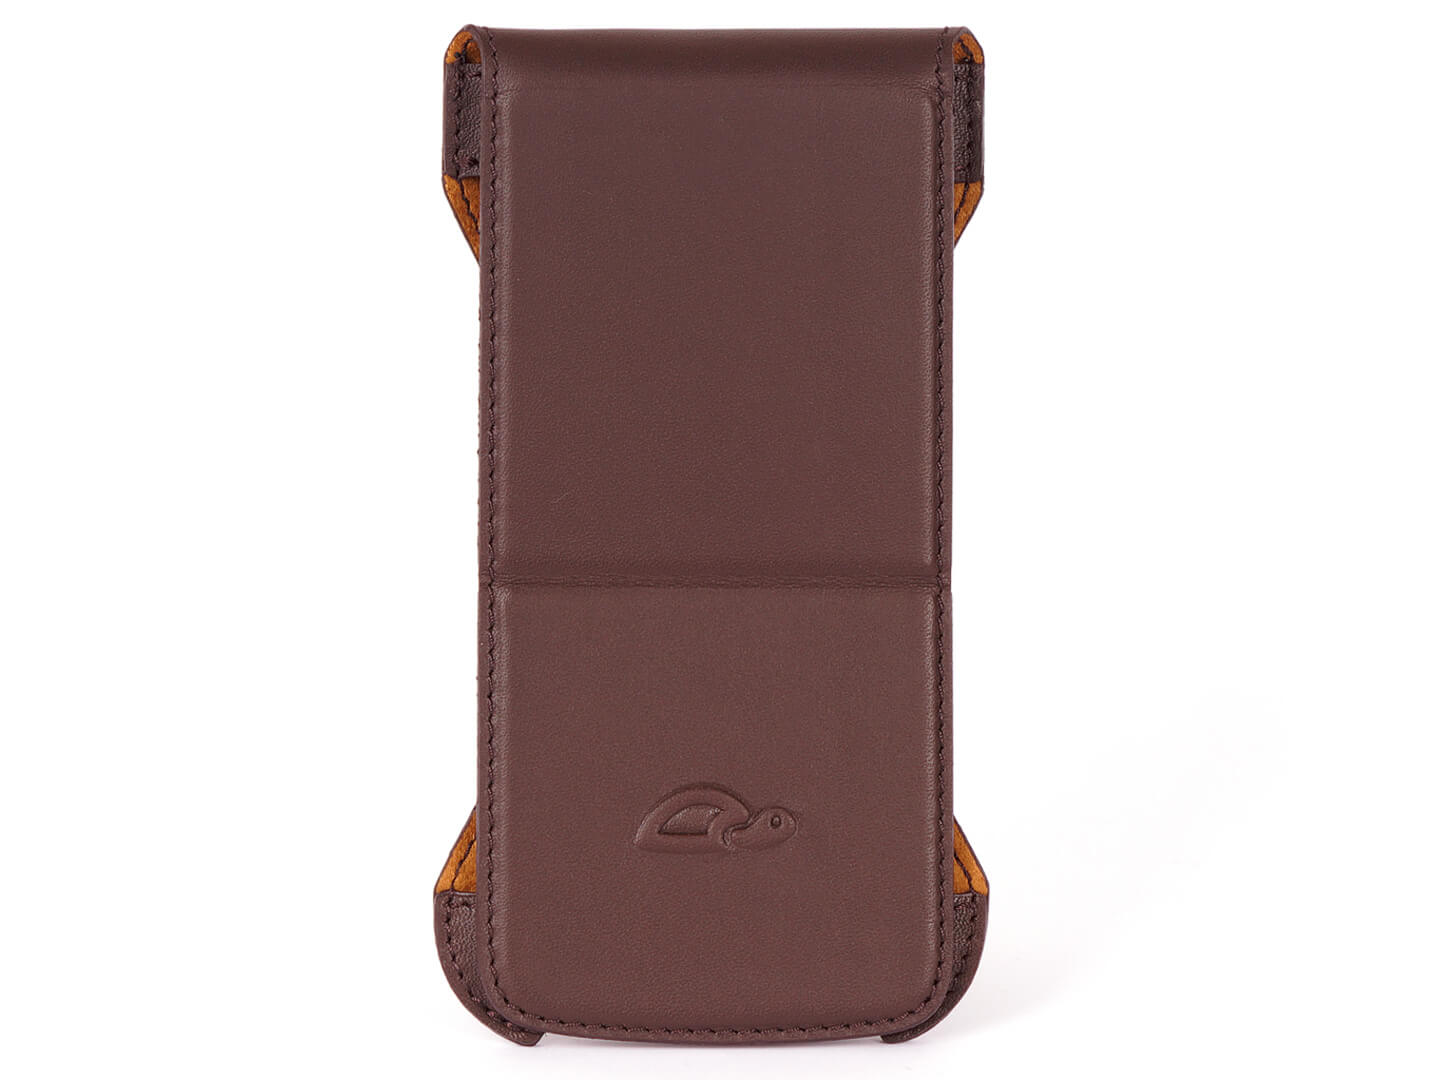 iPhone 6 Flip Case - Vegtan Leather - Stand Function - Card Slot - perspective - brown - Carapaz